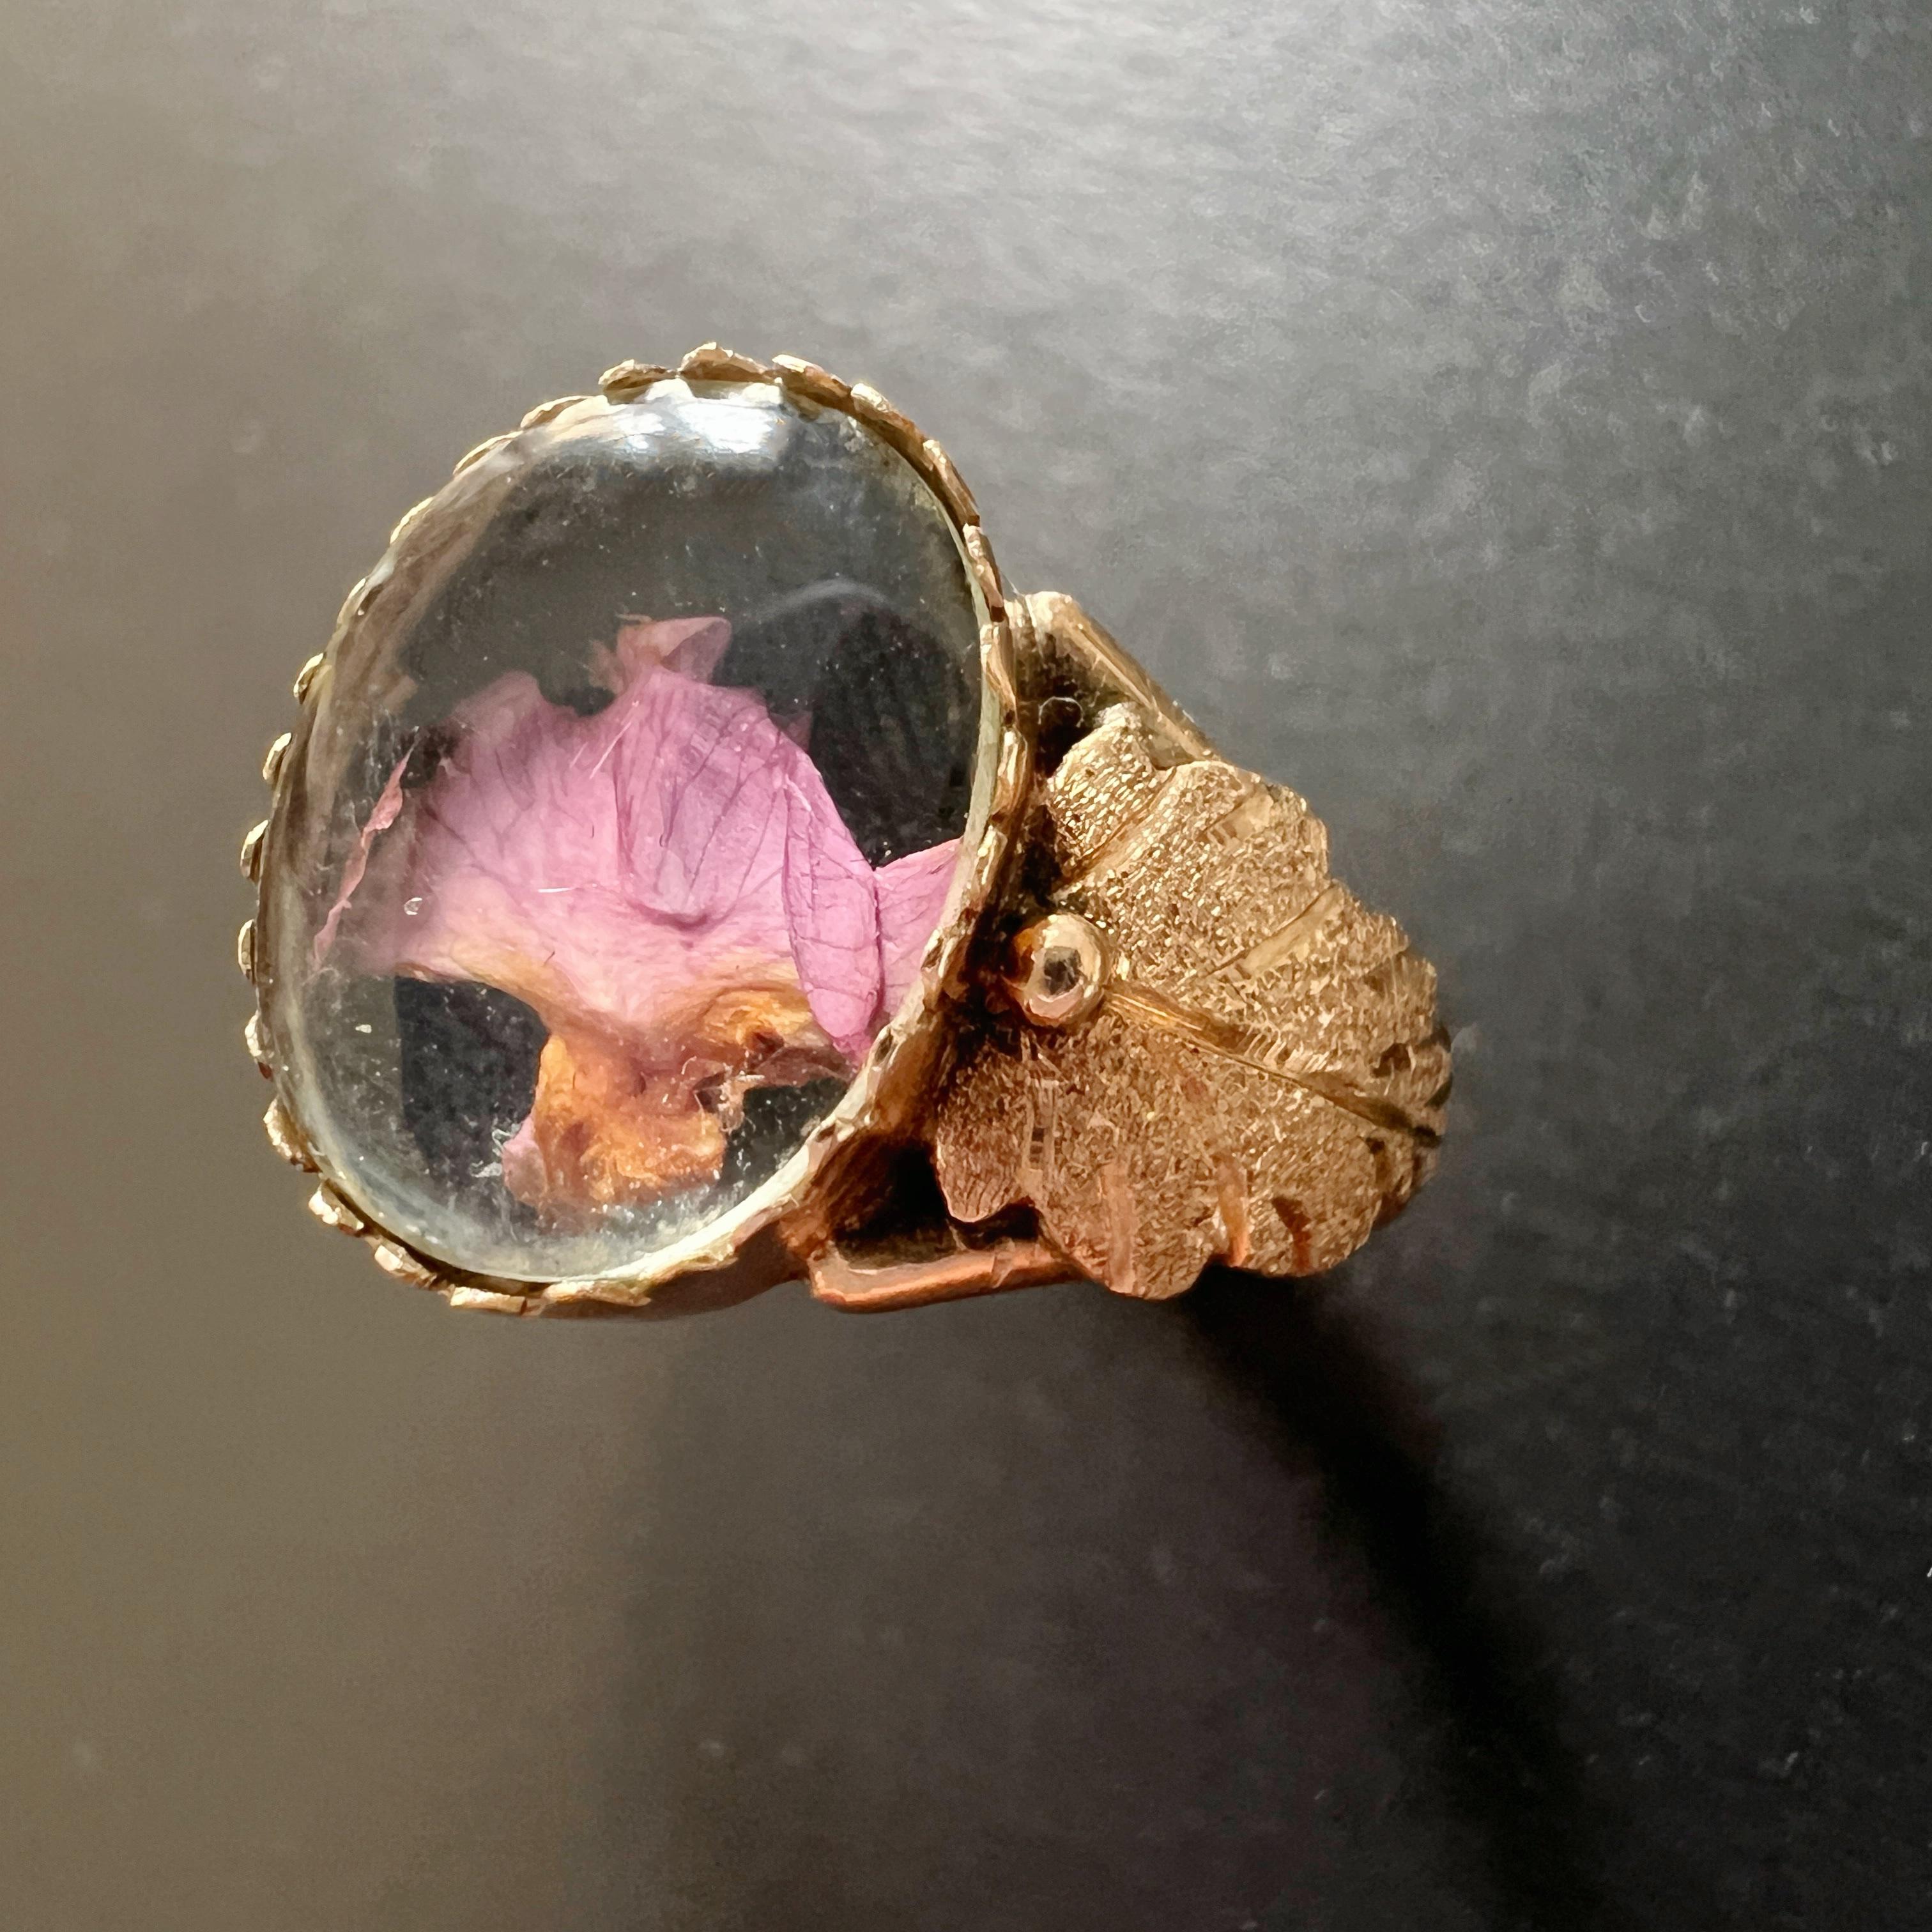 For sale a lovely 14K gold secret box ring all in its original condition. The ring features a little box container on the ring’s head, which can be open and close with the help of a little playdoh (please see the video). 

The box opens and closes